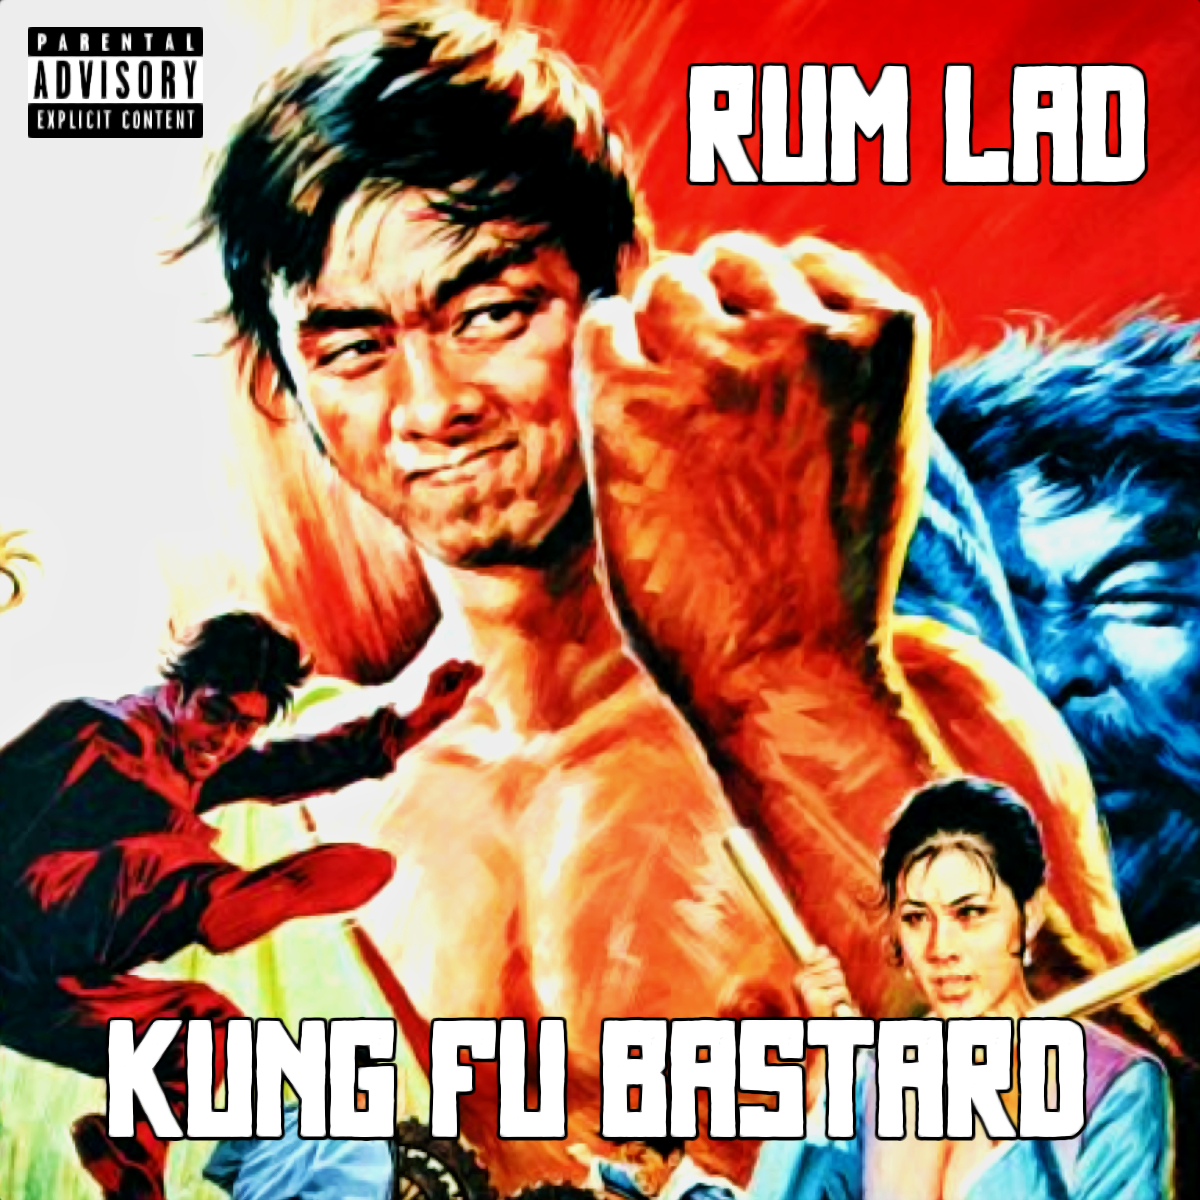 The Next Rum Lad album promises to be the best one yet by a fucking mile!.....Kung Fu Bastard....It's on the way in the new year ;) #punks #punk #workingclass #newwaveofbritishpunk #mentalhealthmatters #kungfubastard #truthtellers